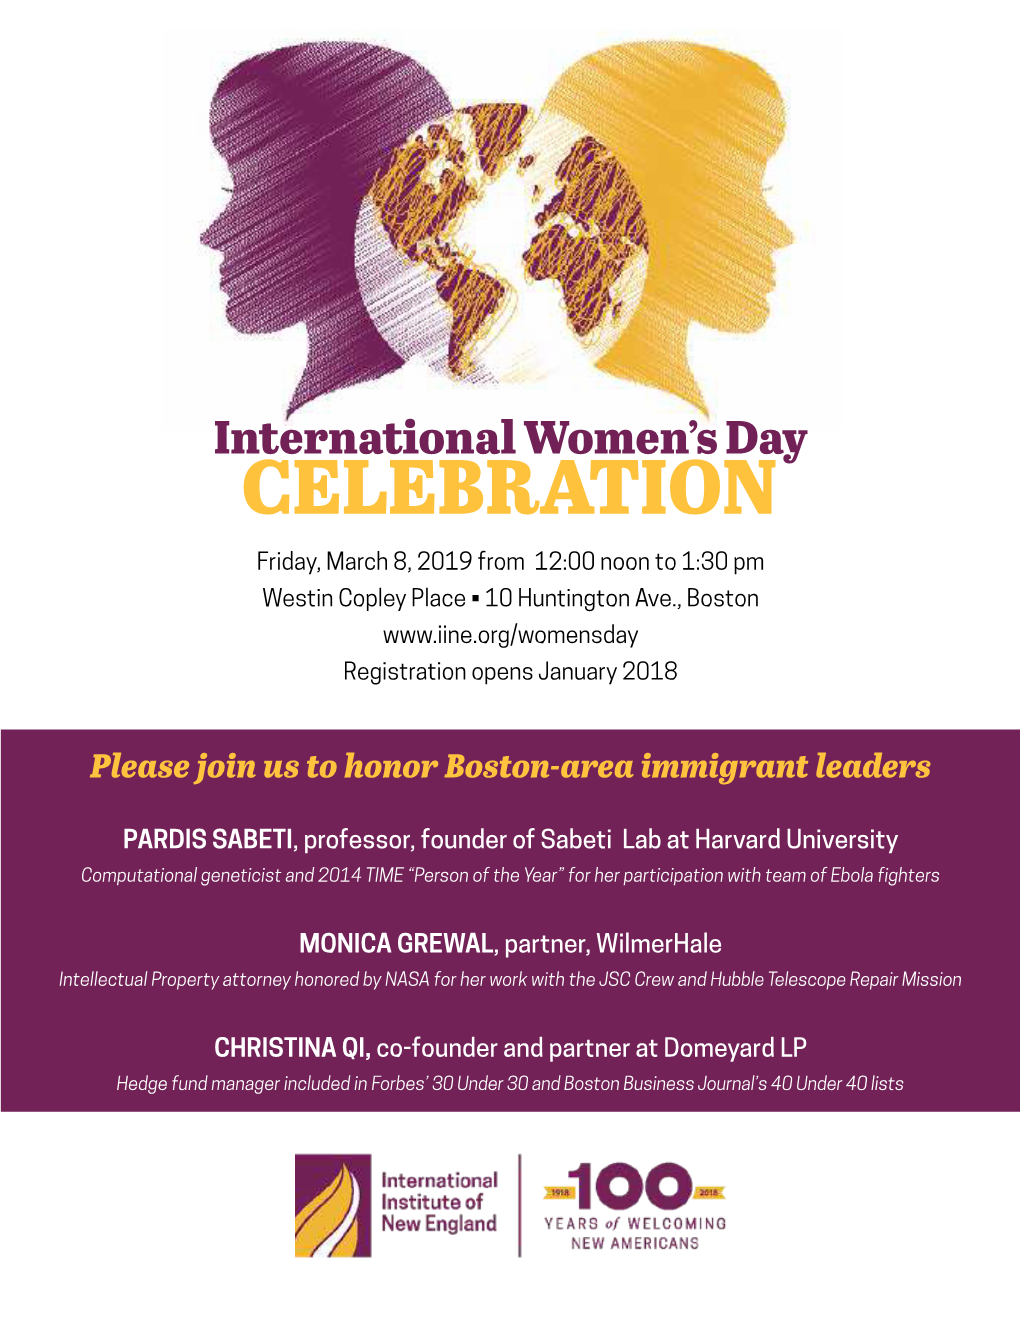 CELEBRATION Friday, March 8, 2019 from 12:00 Noon to 1:30 Pm Westin Copley Place • 10 Huntington Ave., Boston Registration Opens January 2018